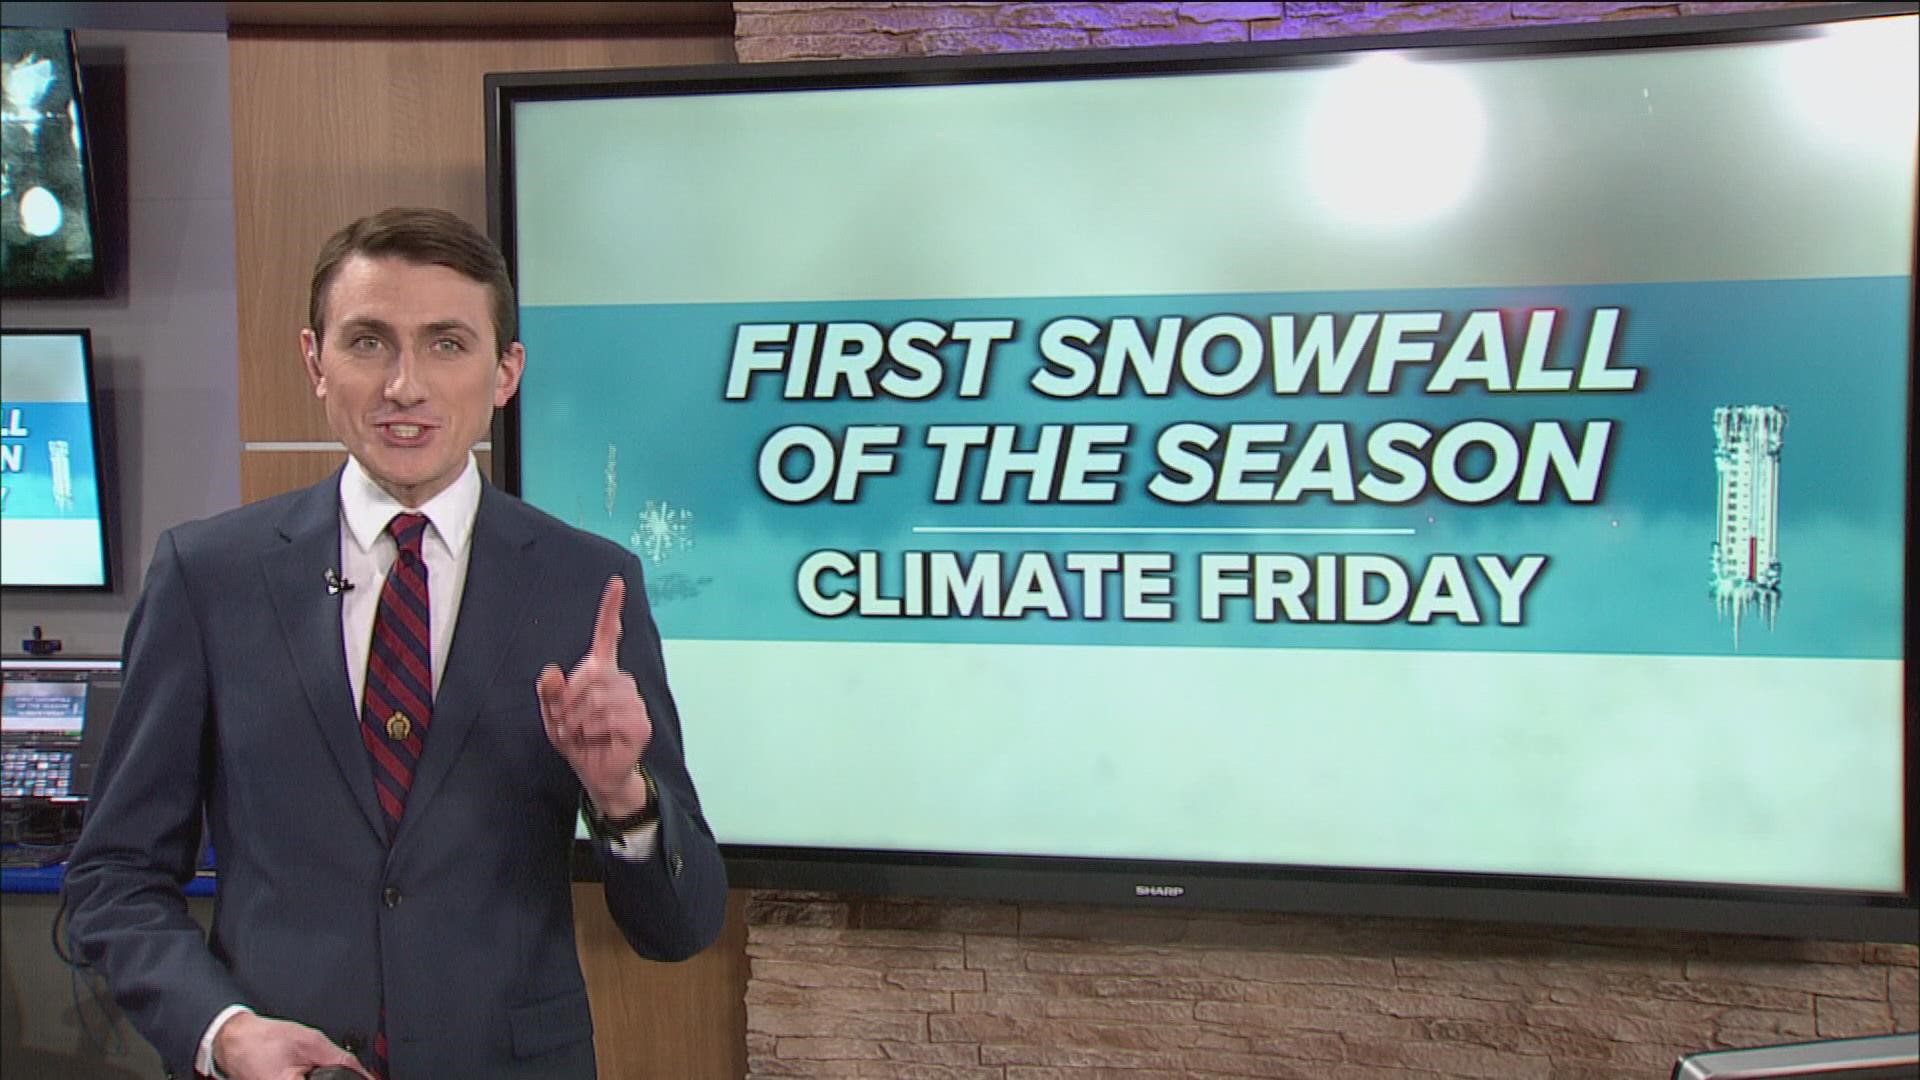 WTOL 11 Meteorologist John Burchfield has the answer in this week's edition of Climate Friday.